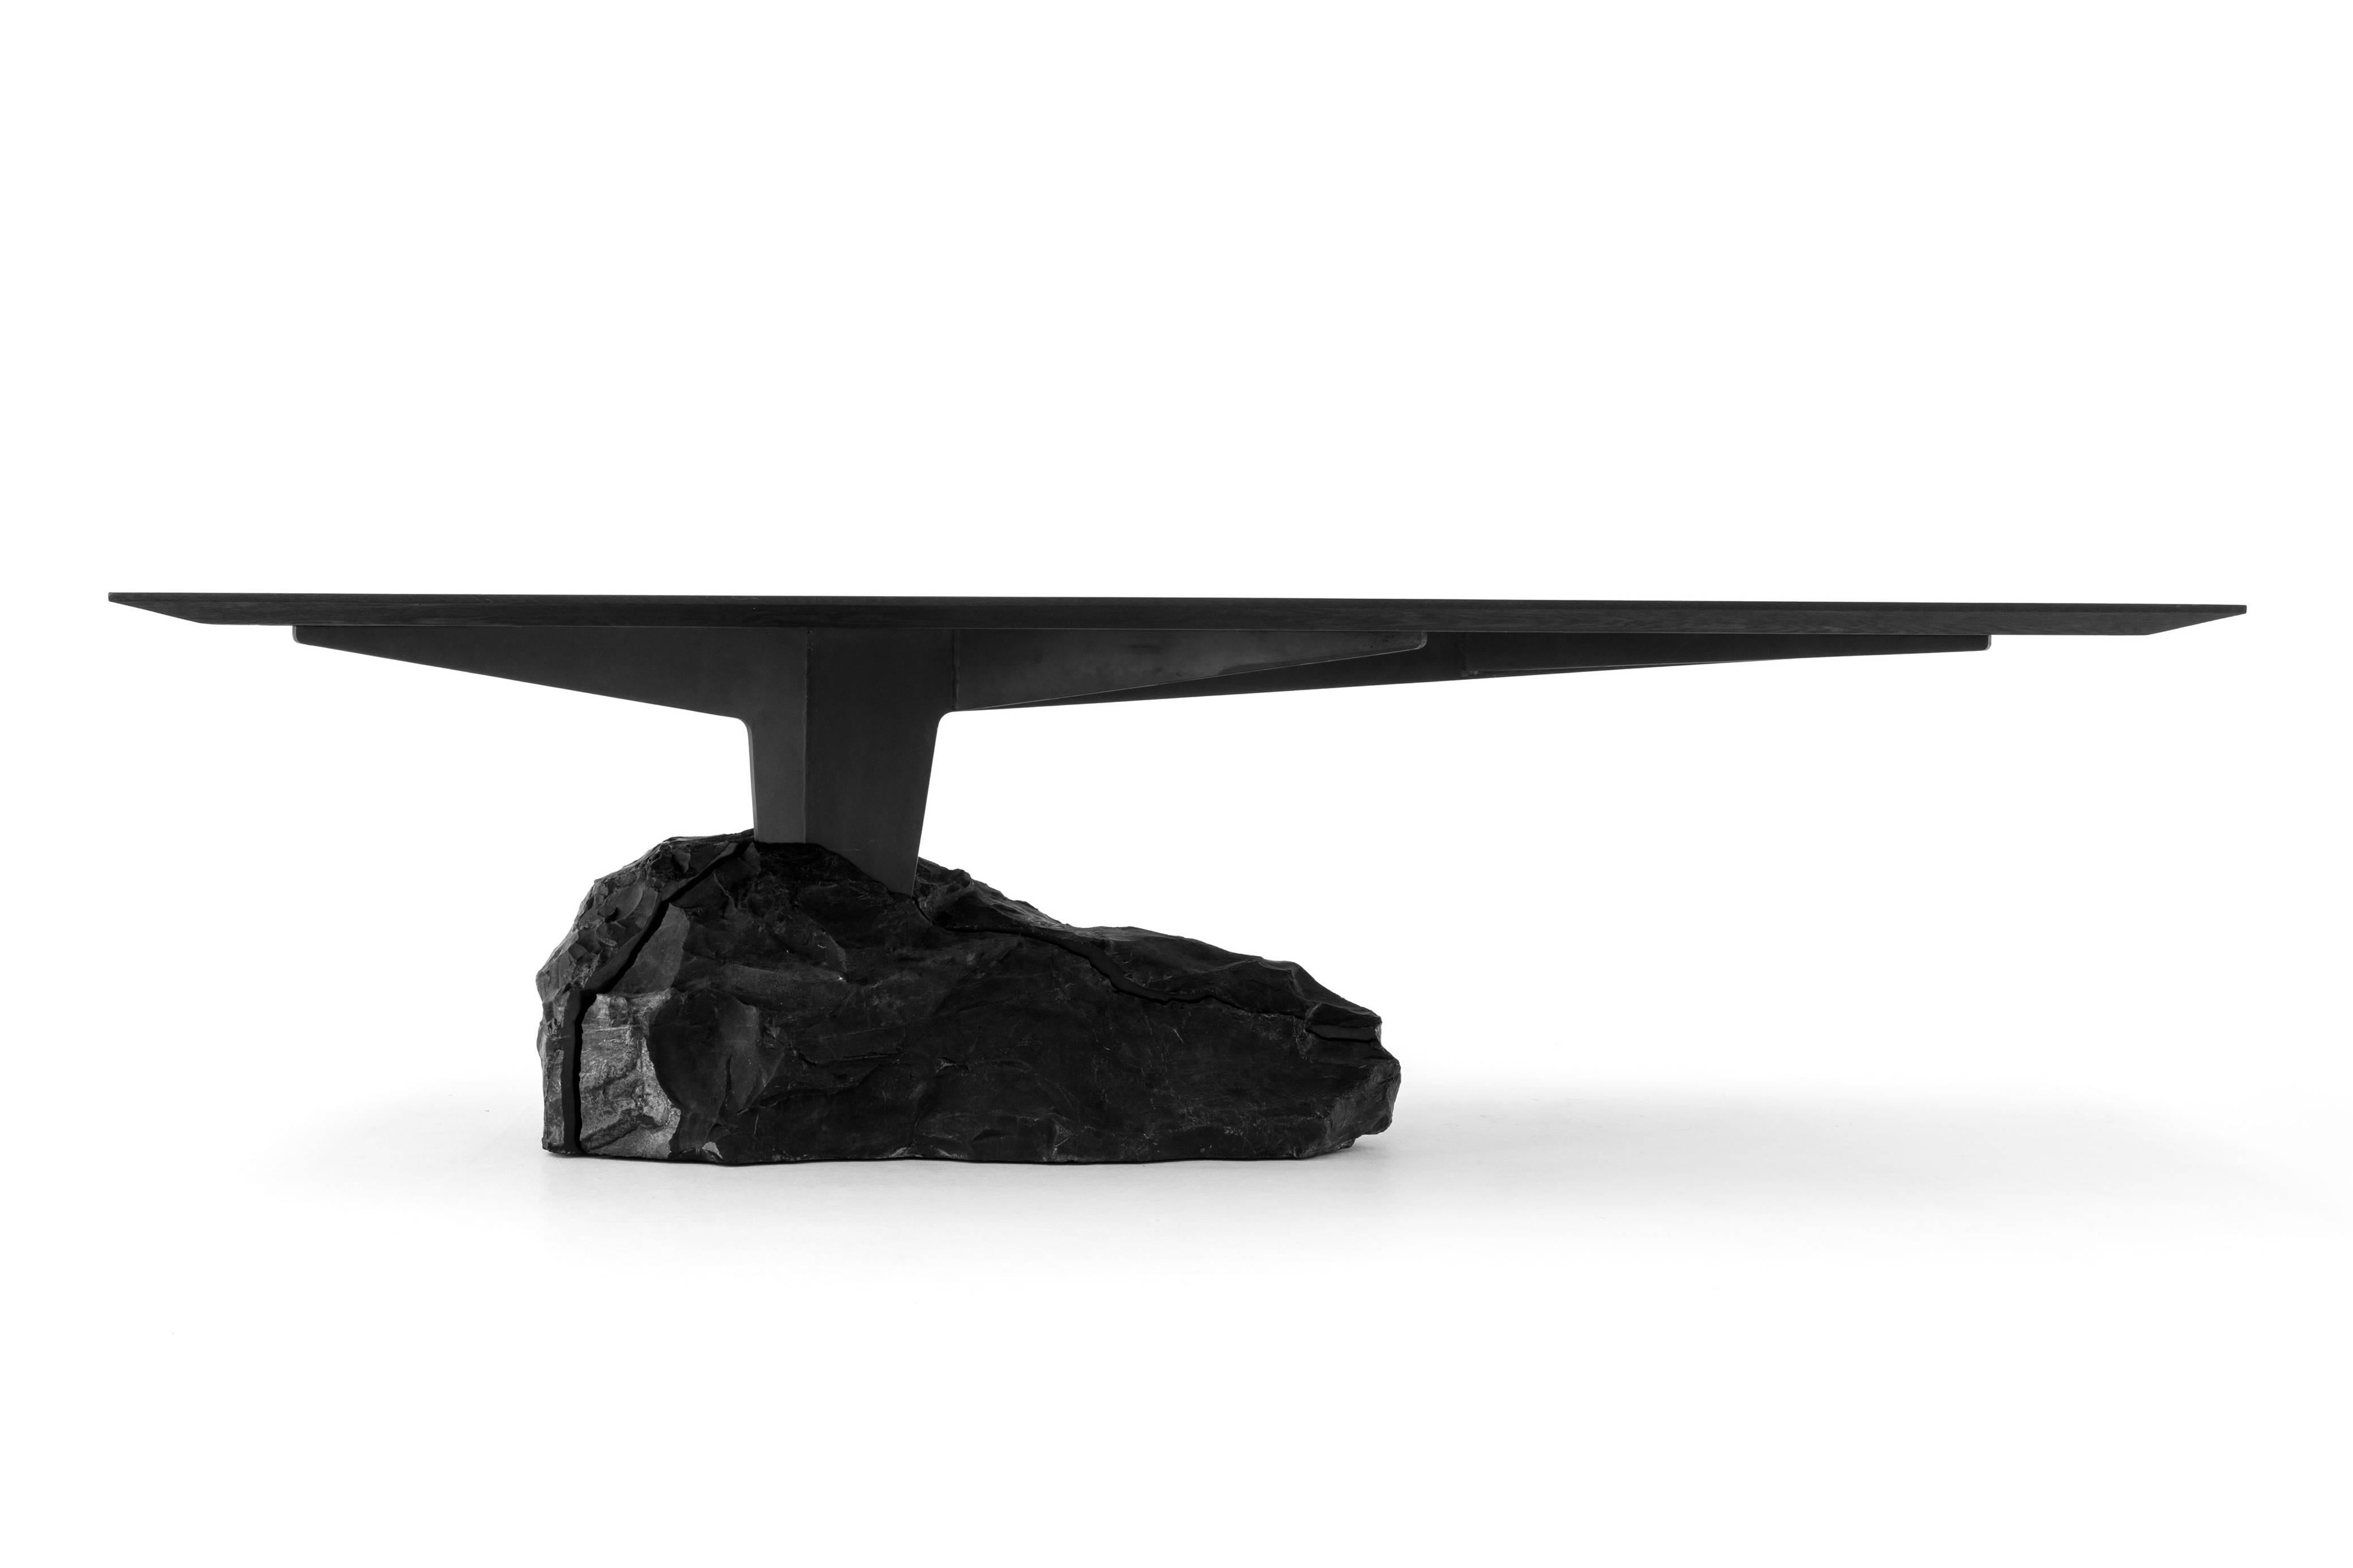 The dining table is characterized by visual balance. The 2.6-meter long dining table achieves its shape from the counterweight formed of a large piece of black Orizaba marble stone. The marble creates the necessary weight to support the steel